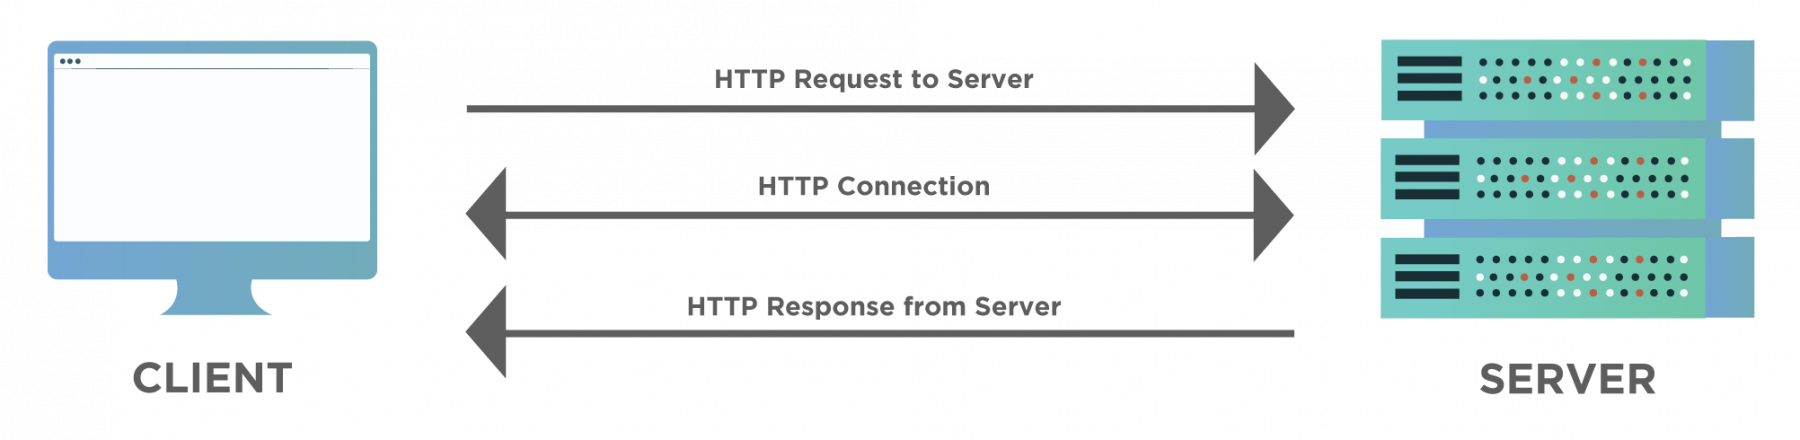 HTTP-Request.png